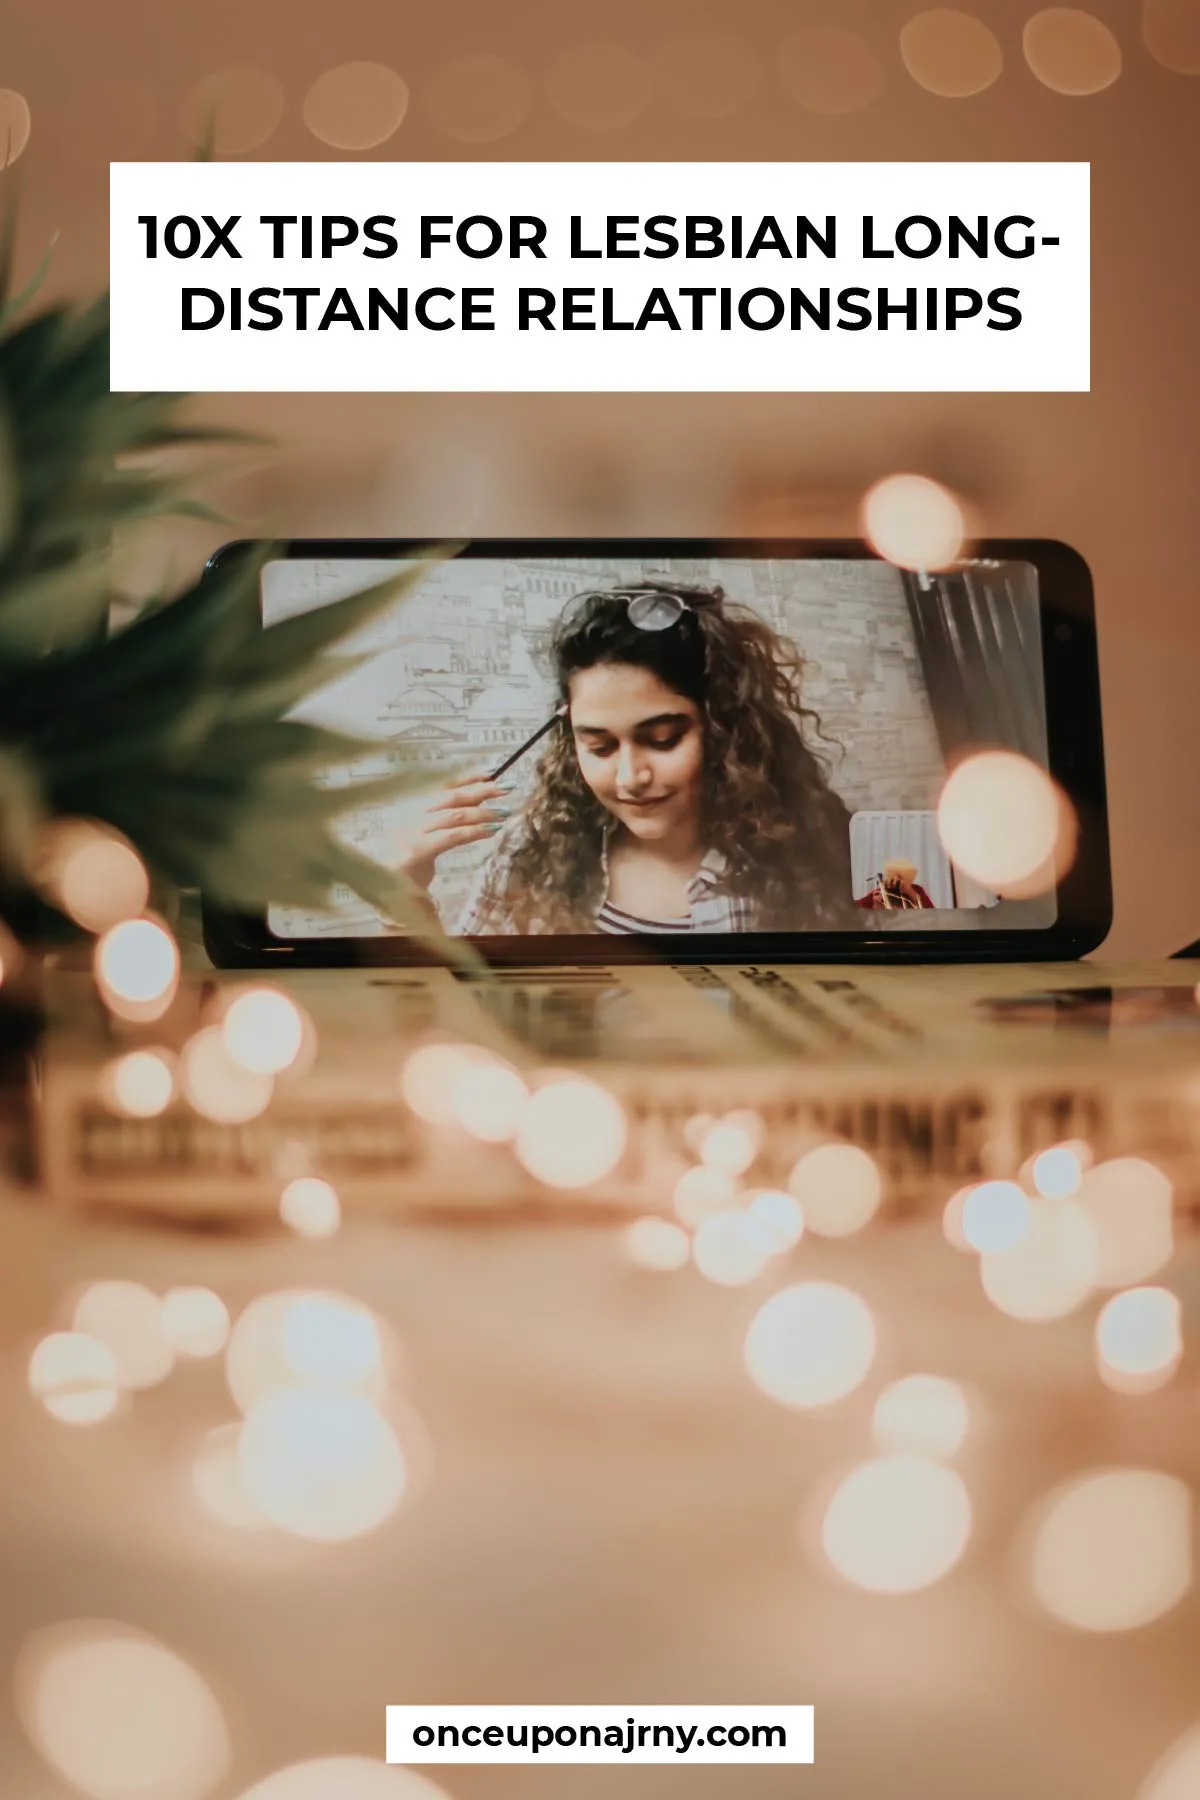 10 Tips for Lesbian Long-Distance Relationships photo by Dollar Gill Unsplash